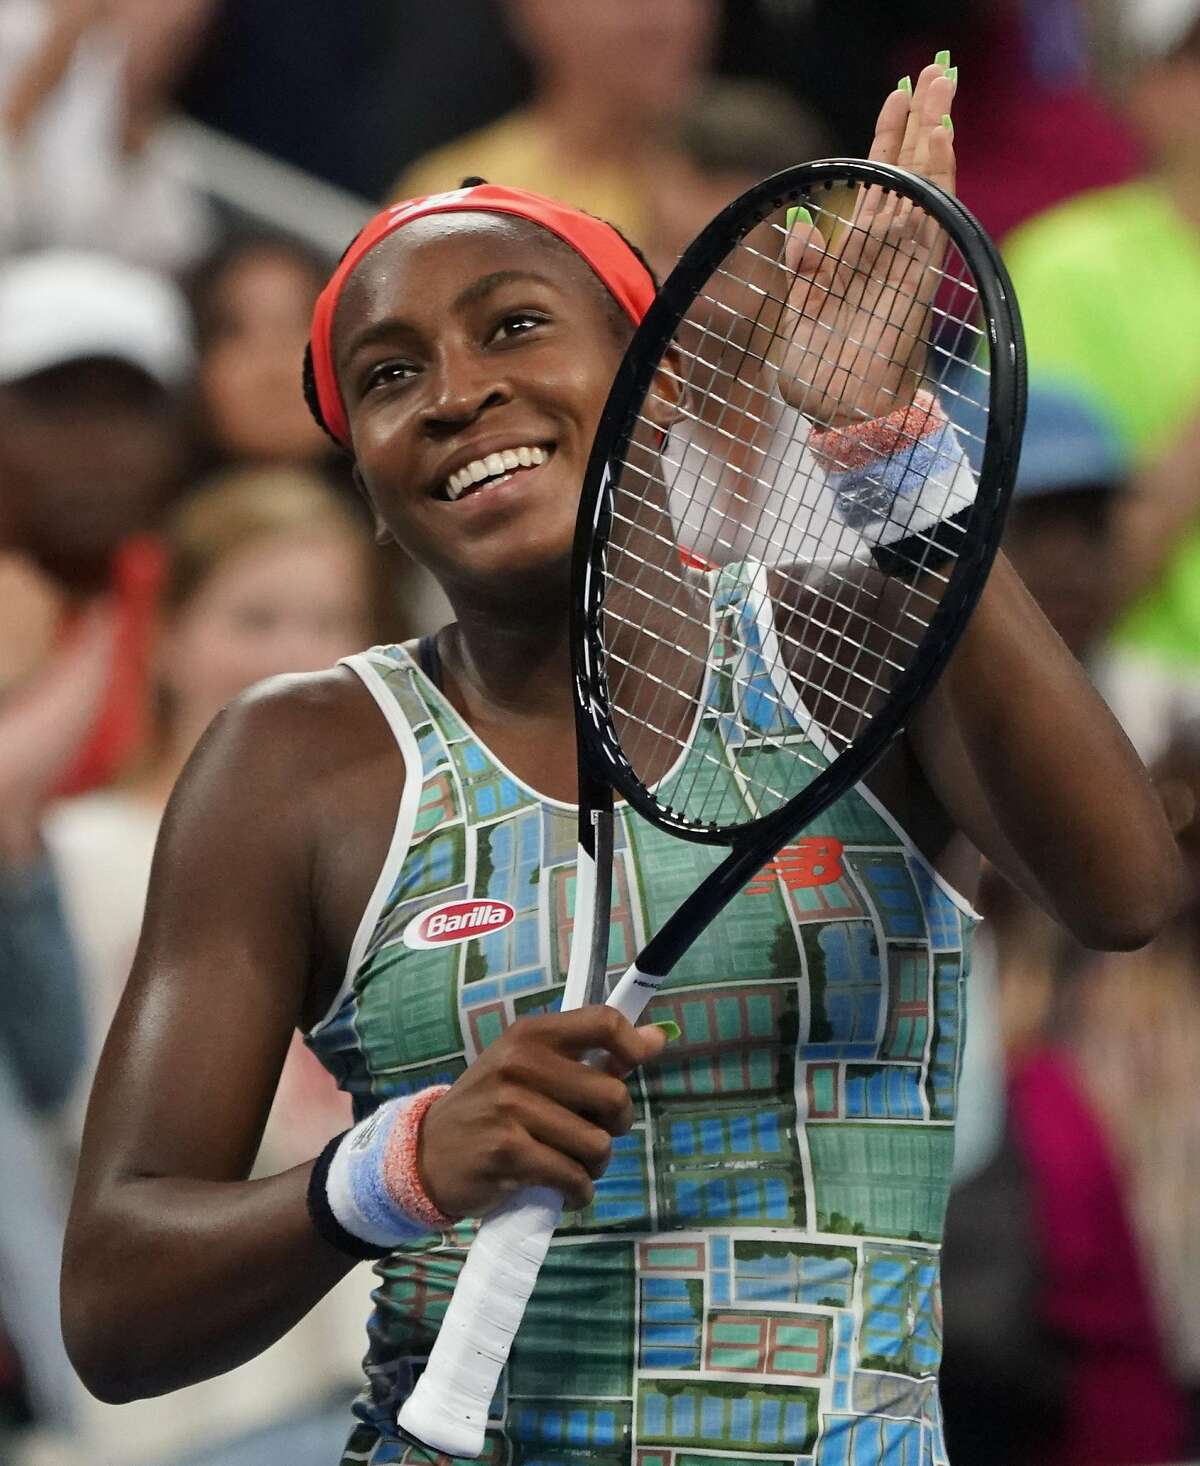 Coco Gauff of the US celebrates her win over Anastasia Potapova of Russia during their first round match of the women's 2019 US Open tennis tournament August 27, 2019 in New York. (Photo by Don Emmert / AFP)DON EMMERT/AFP/Getty Images